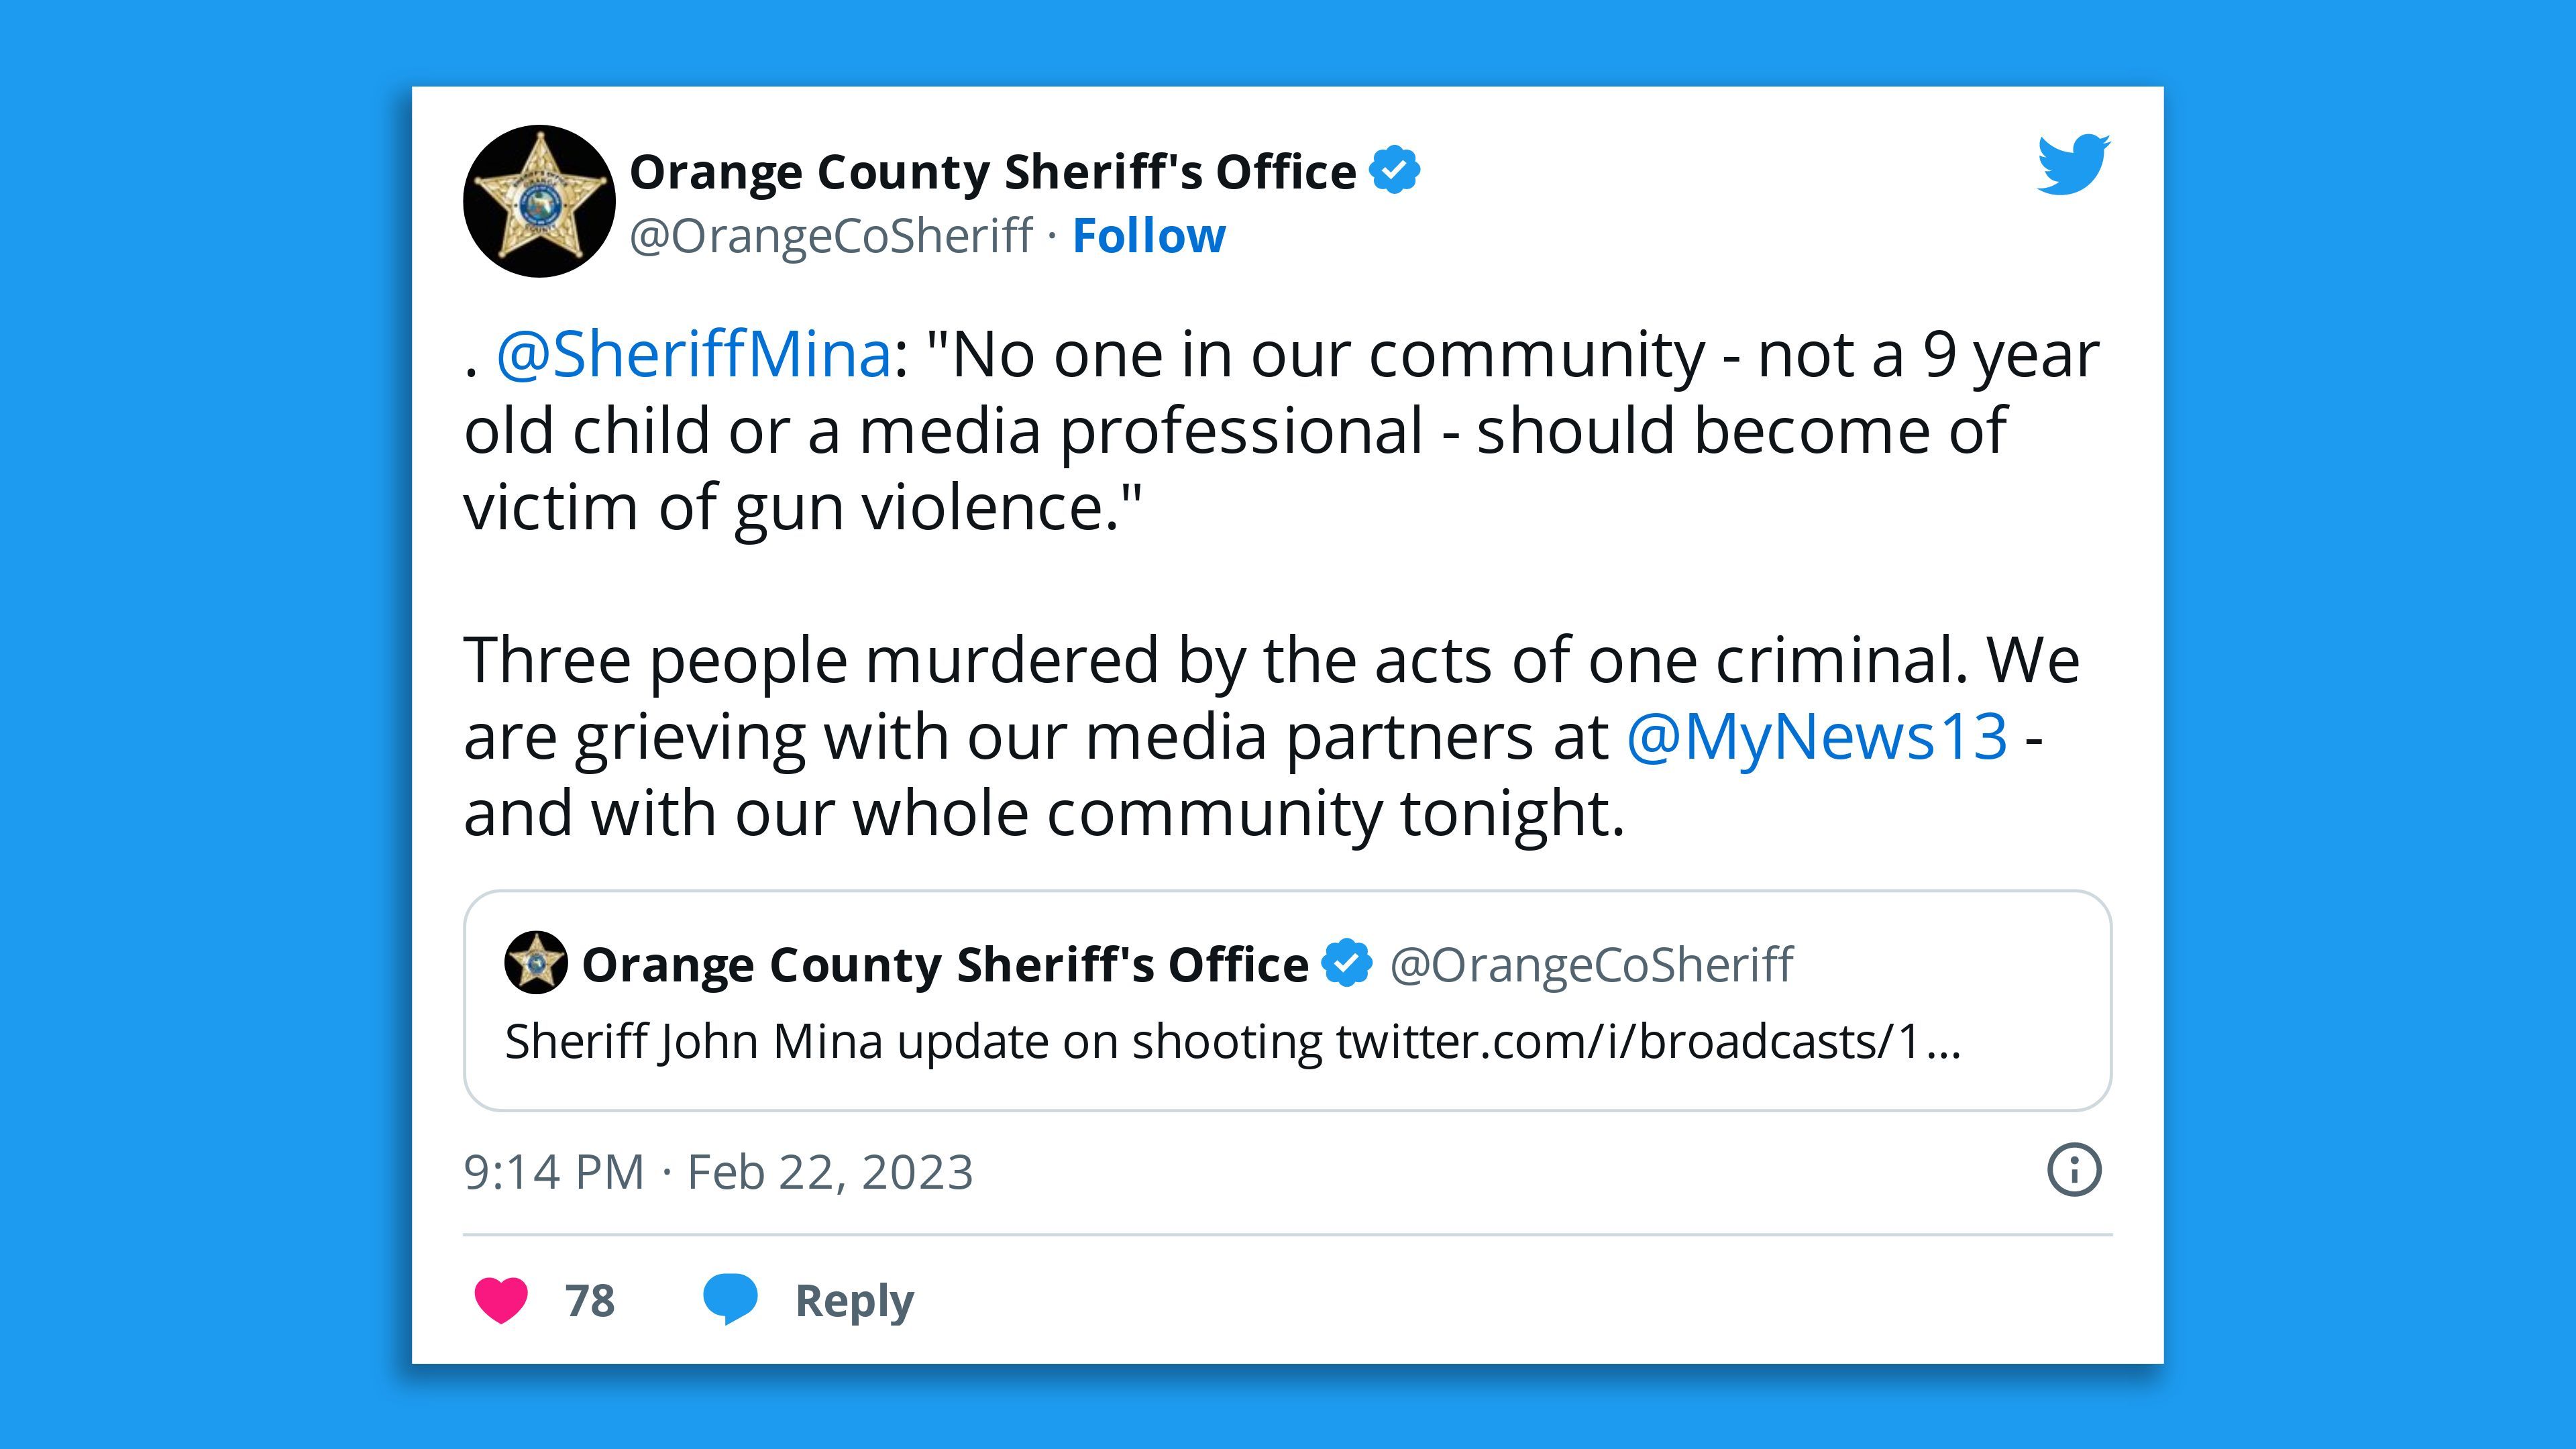 A screenshot of an Orange County Sheriff's Office tweet, saying: "No one in our community - not a 9 year old child or a media professional - should become of victim of gun violence."    Three people murdered by the acts of one criminal. We are grieving with our media partners at  @MyNews13  - and with our whole community tonight."